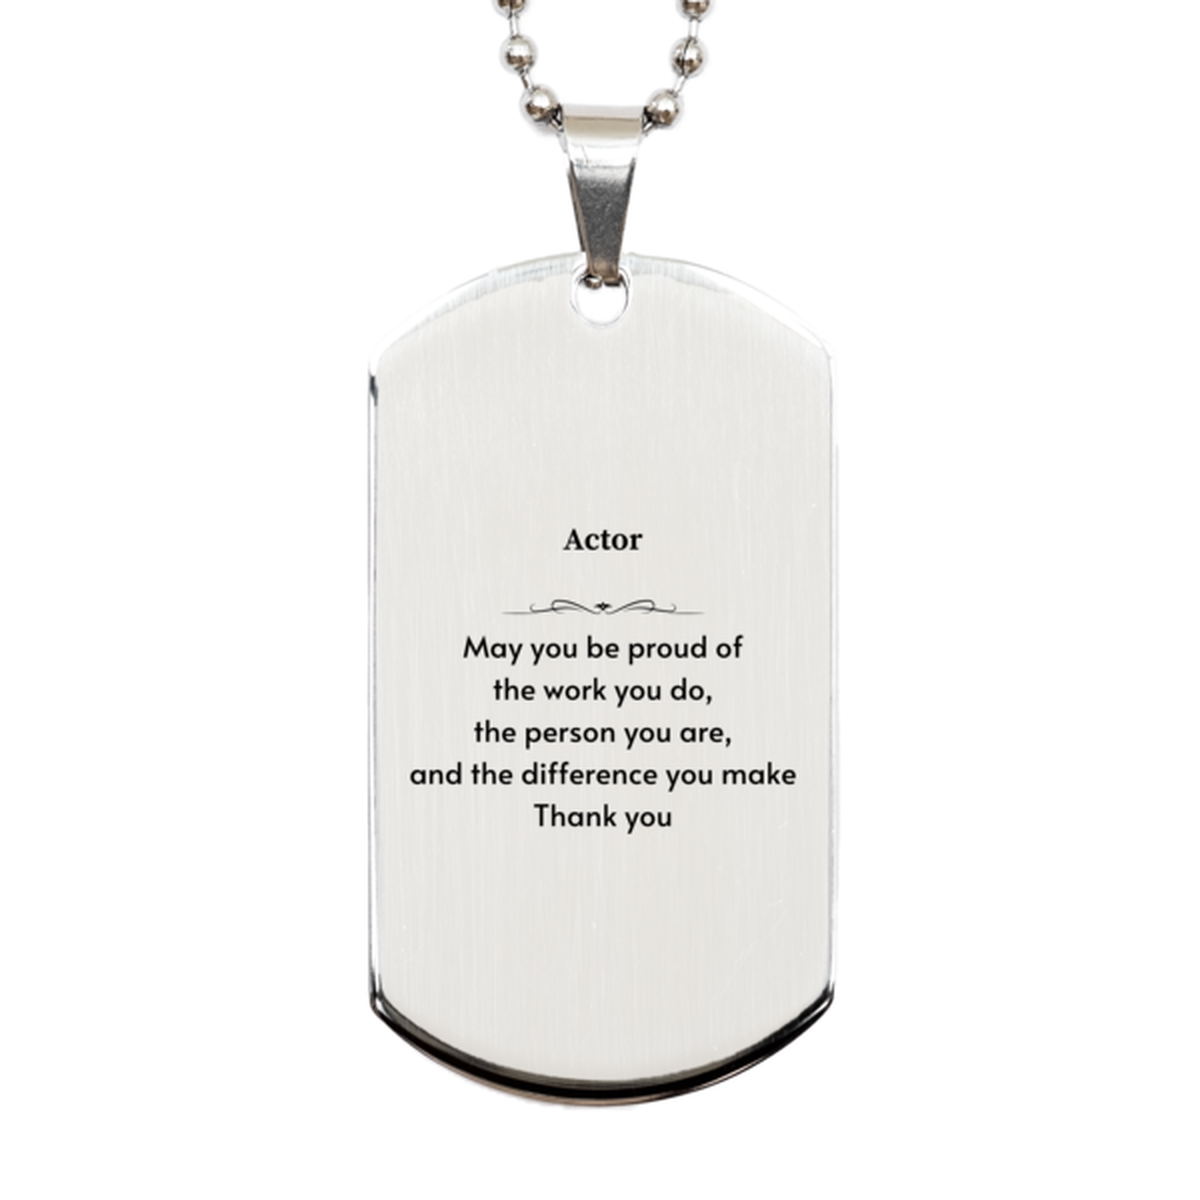 Heartwarming Silver Dog Tag Retirement Coworkers Gifts for Actor, Actor May You be proud of the work you do, the person you are Gifts for Boss Men Women Friends